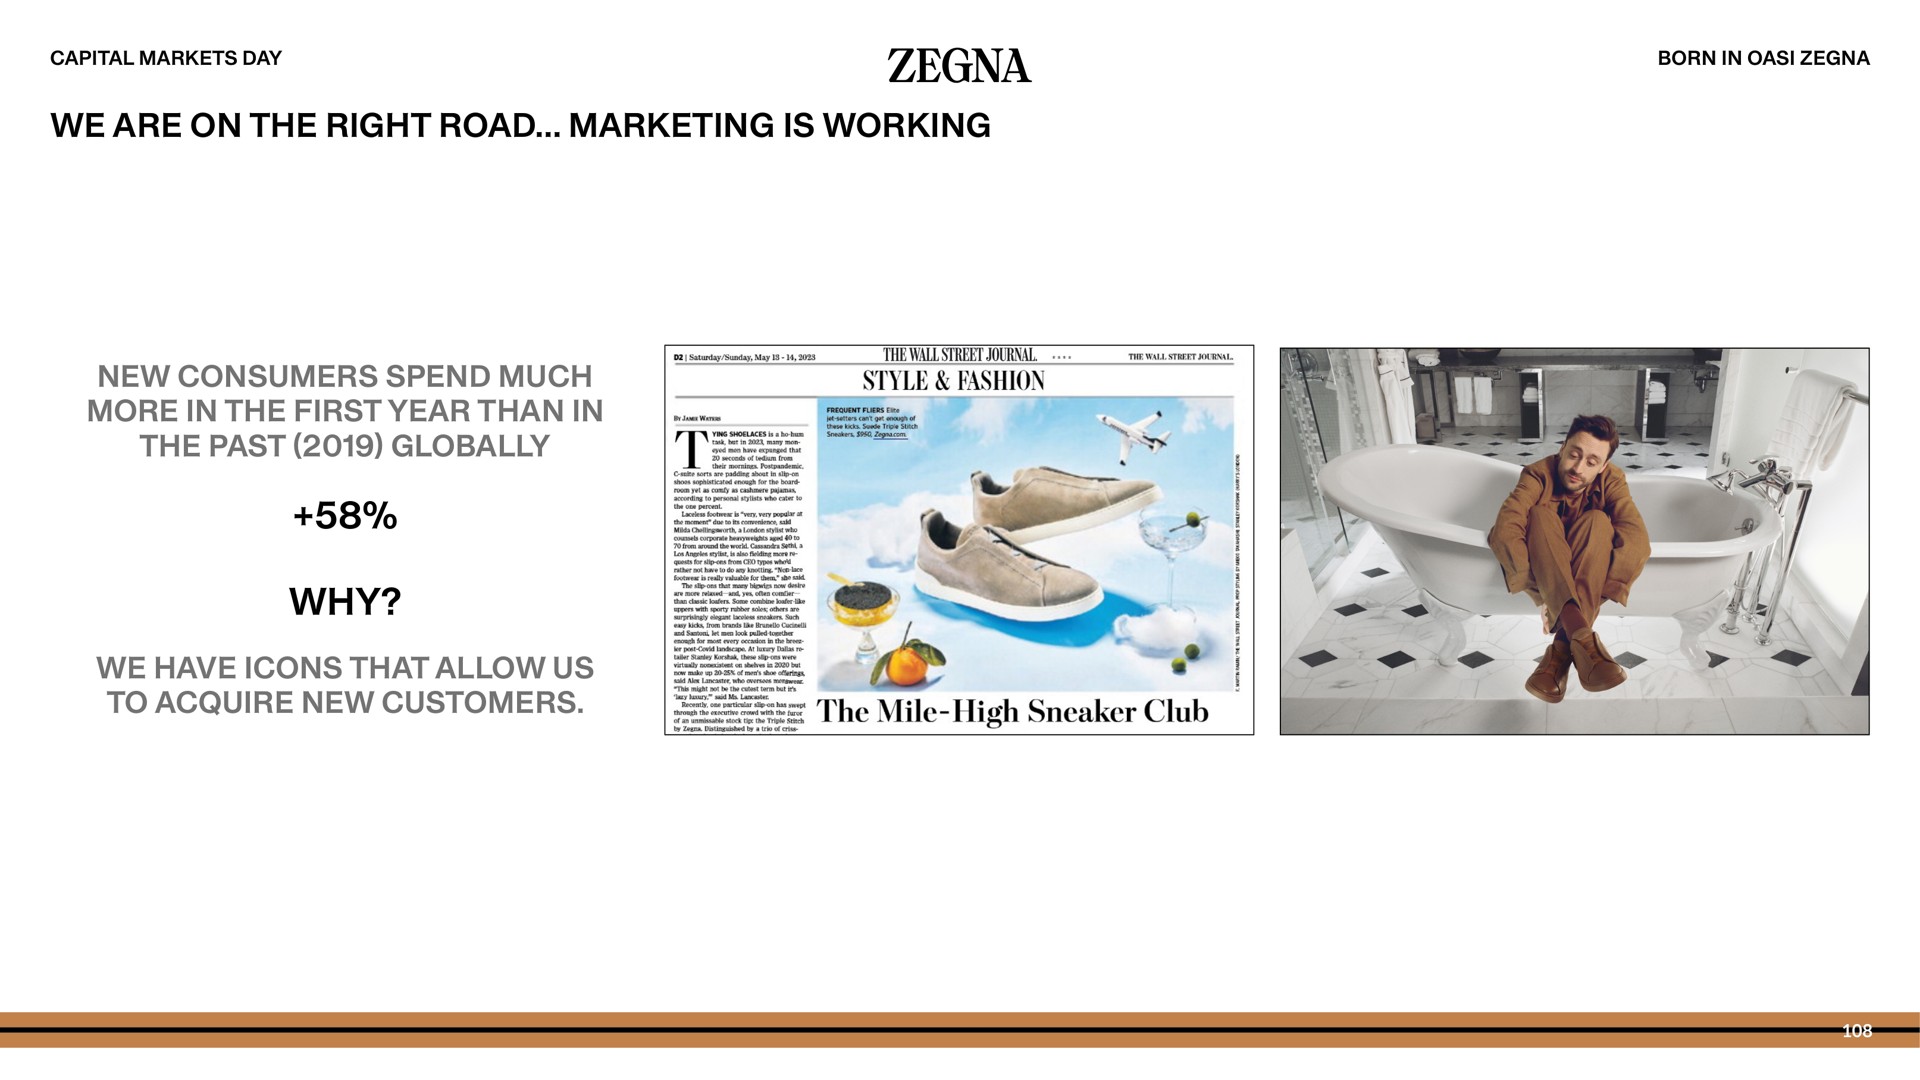 we are on the right road marketing is working new consumers spend much more in the first year than in the past globally why we have icons that allow us to acquire new customers | Zegna